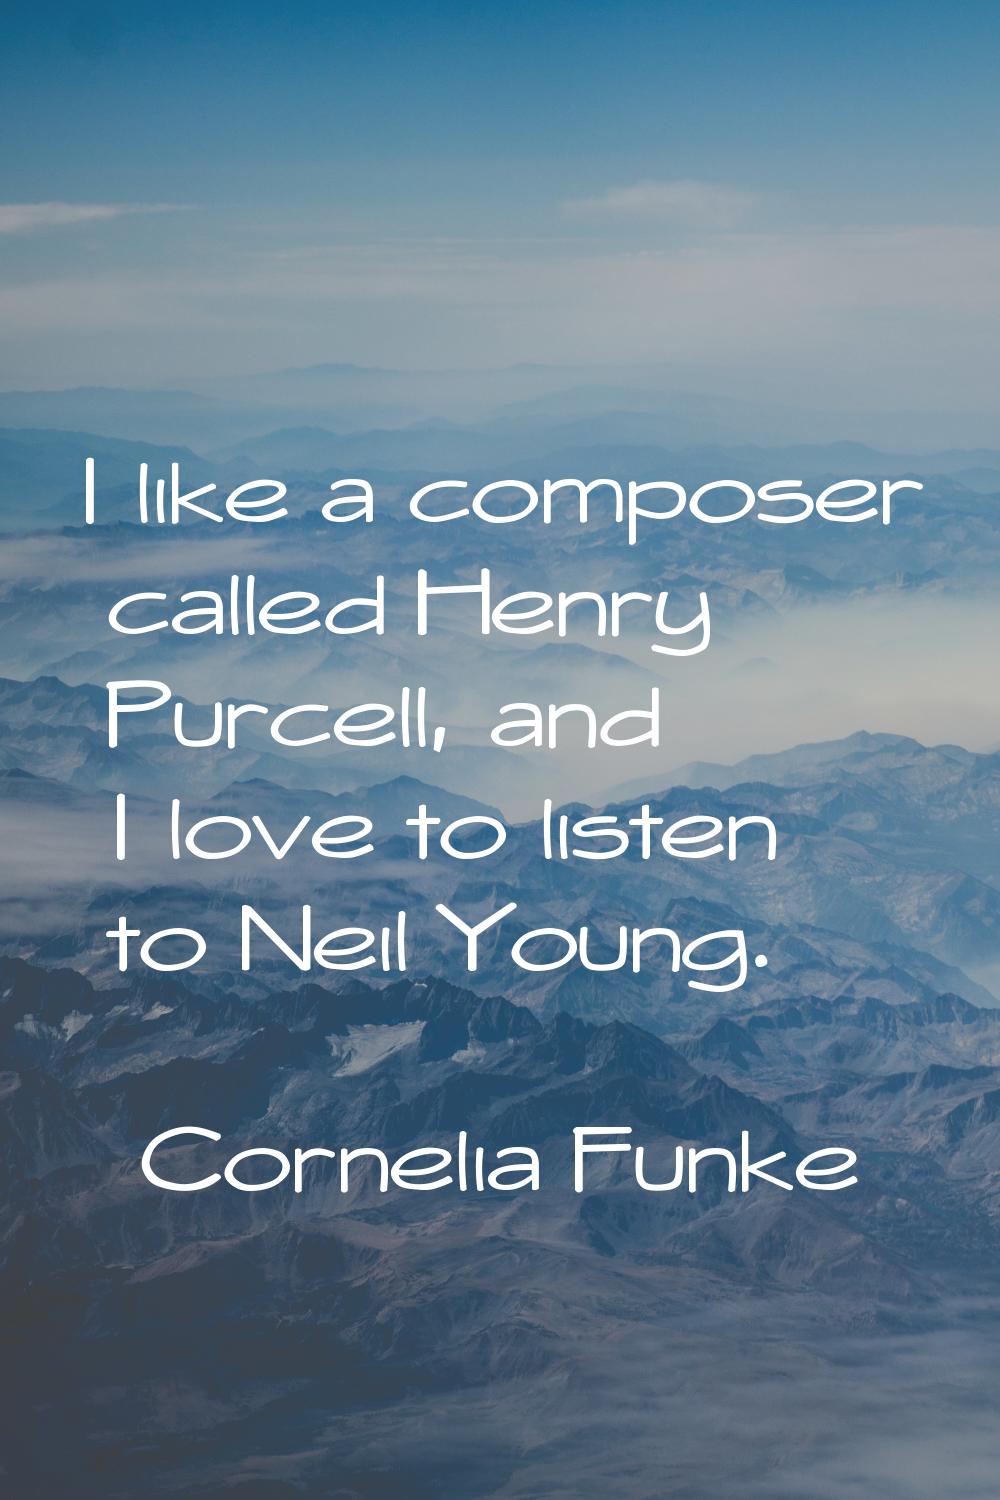 I like a composer called Henry Purcell, and I love to listen to Neil Young.